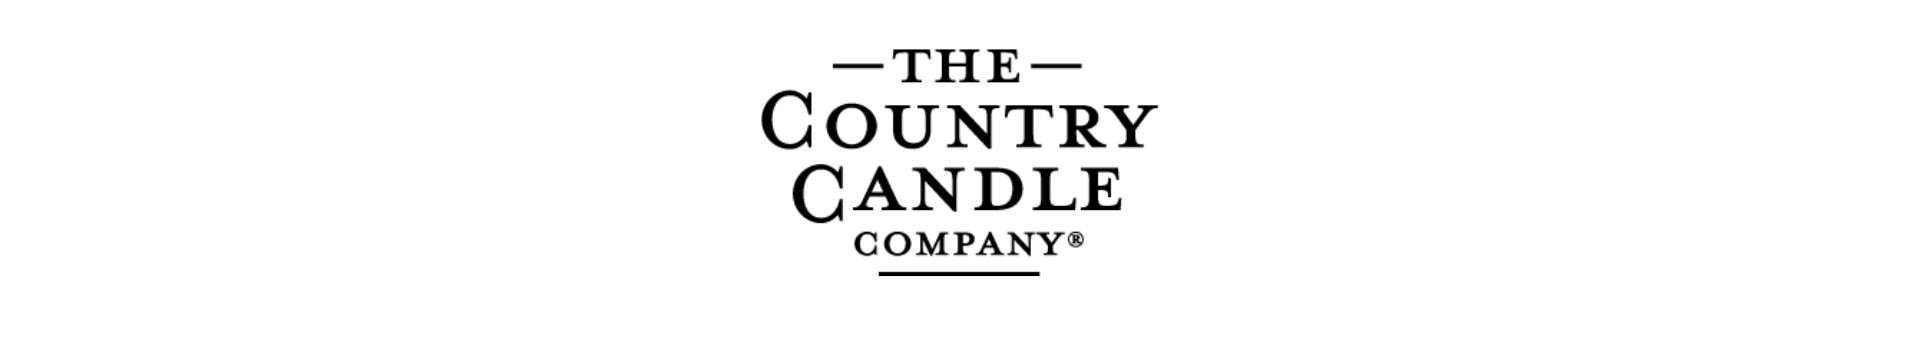 The country Candle logo